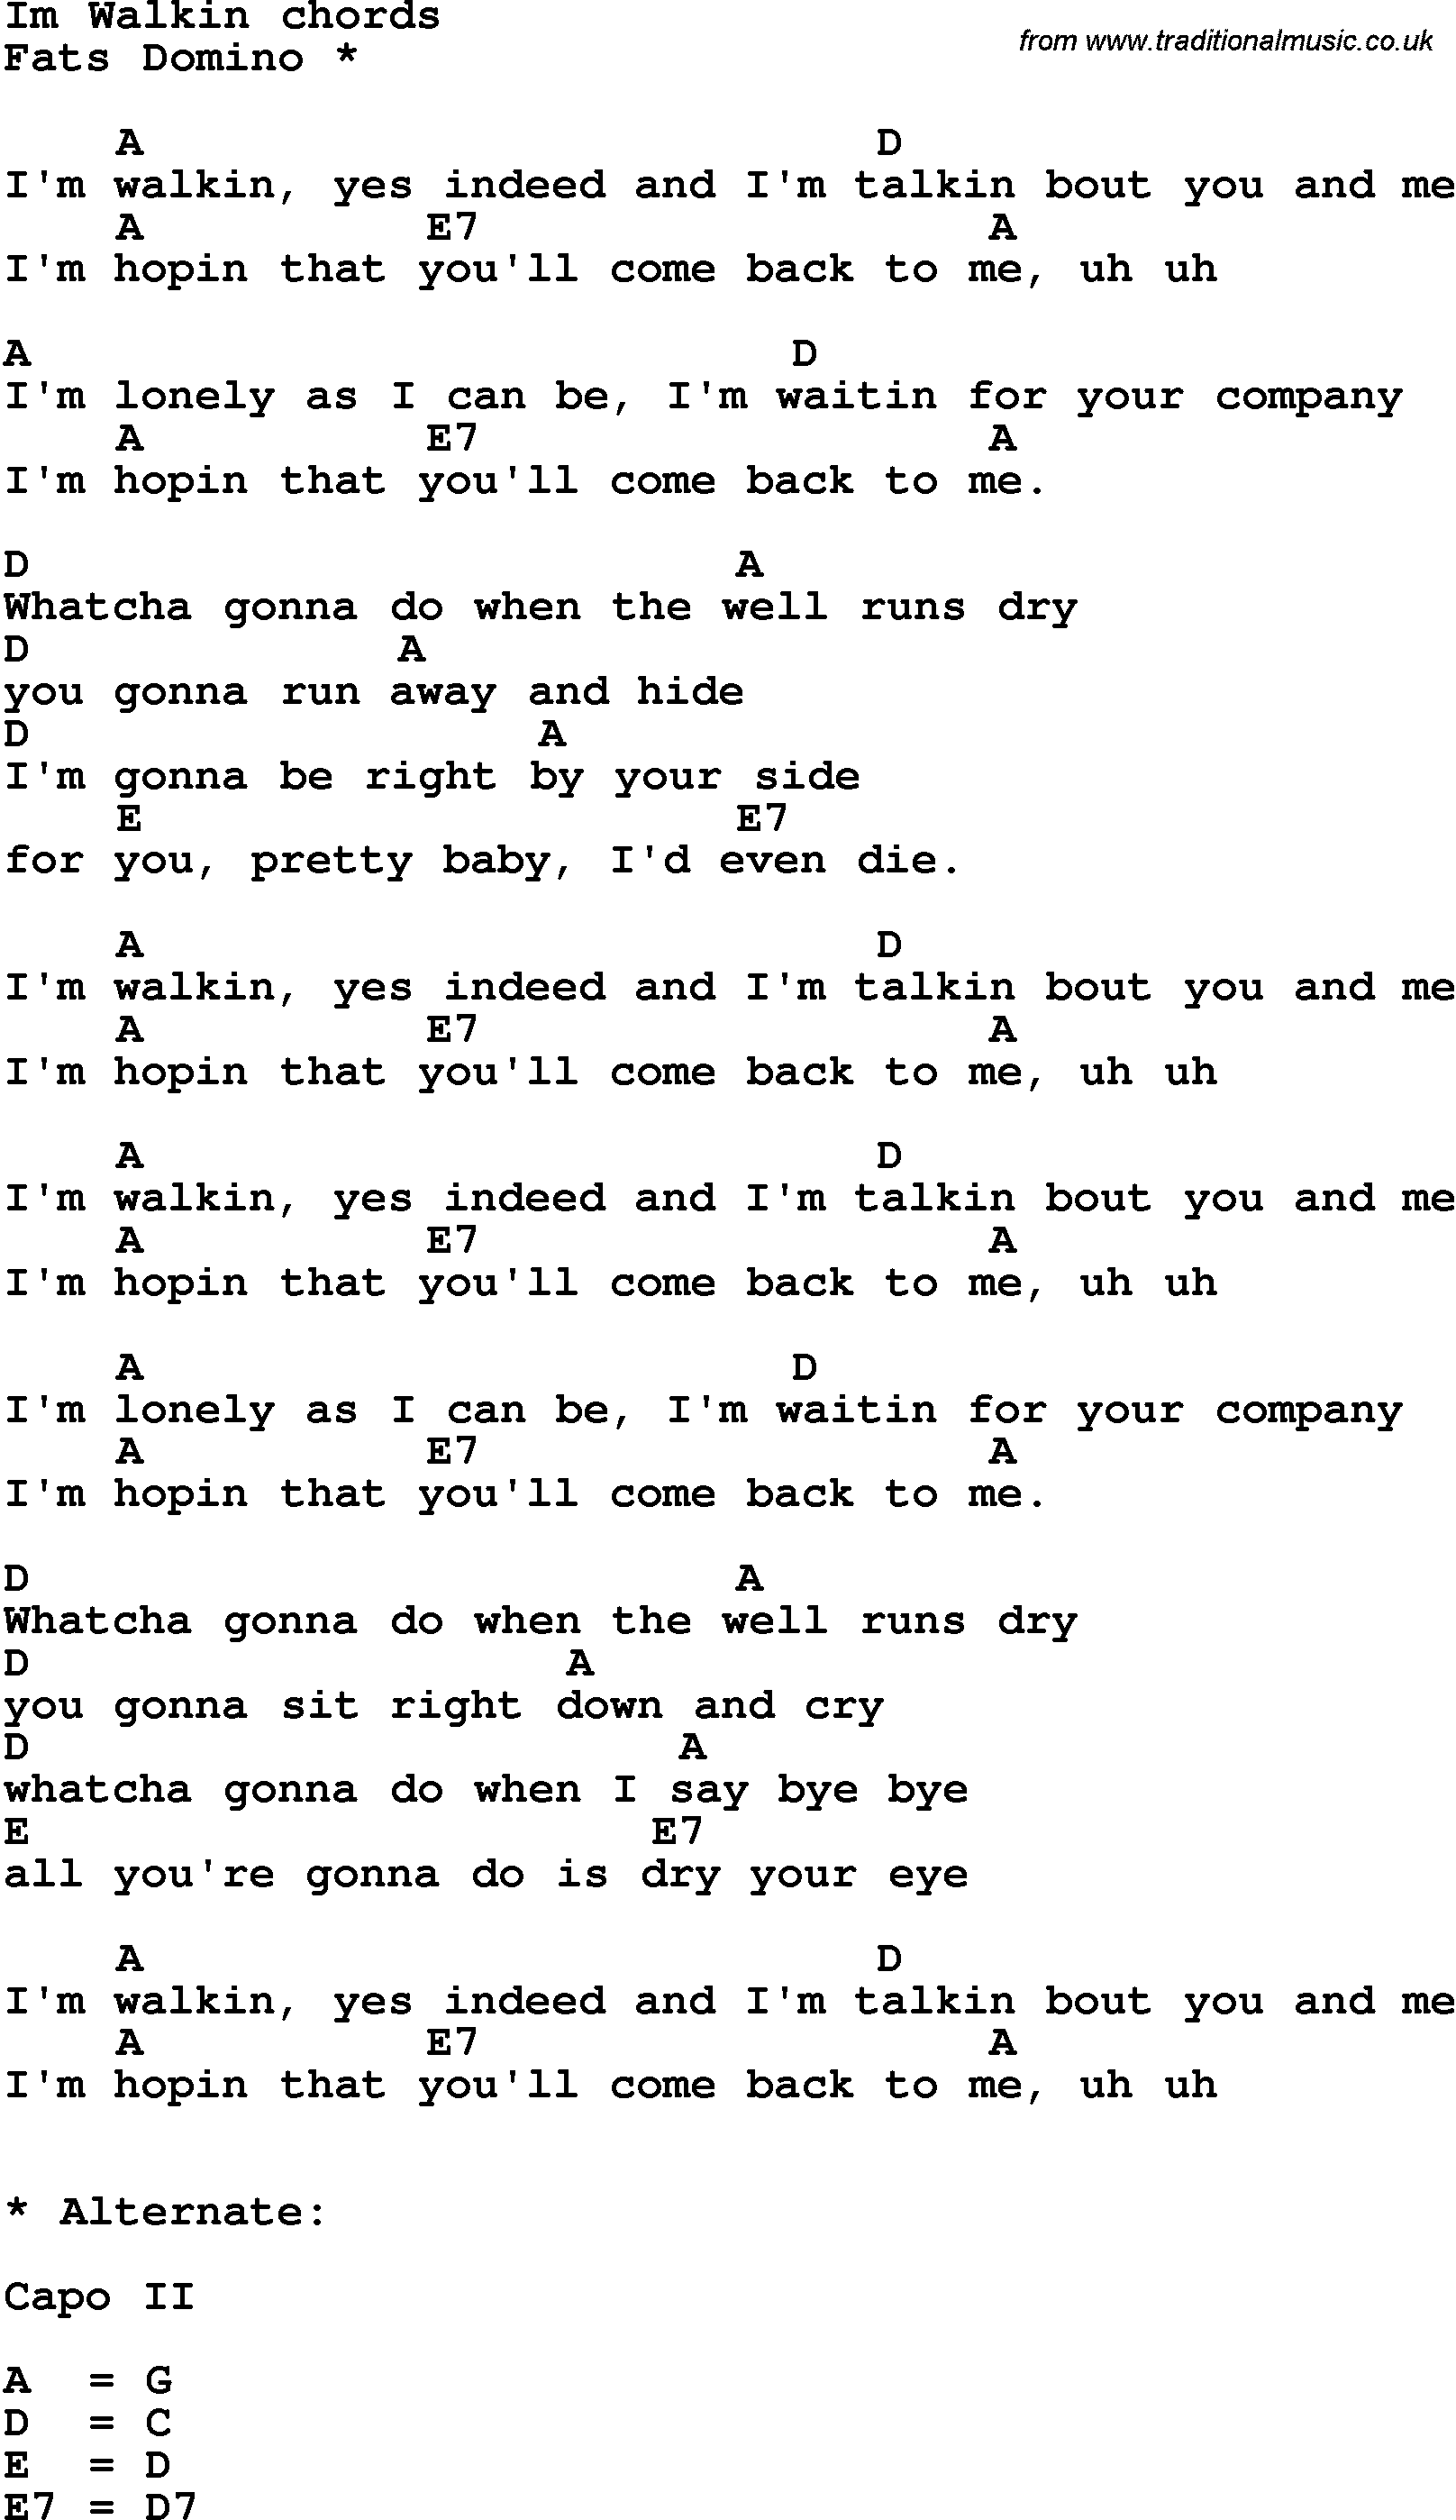 Song Lyrics with guitar chords for I'm Walkin